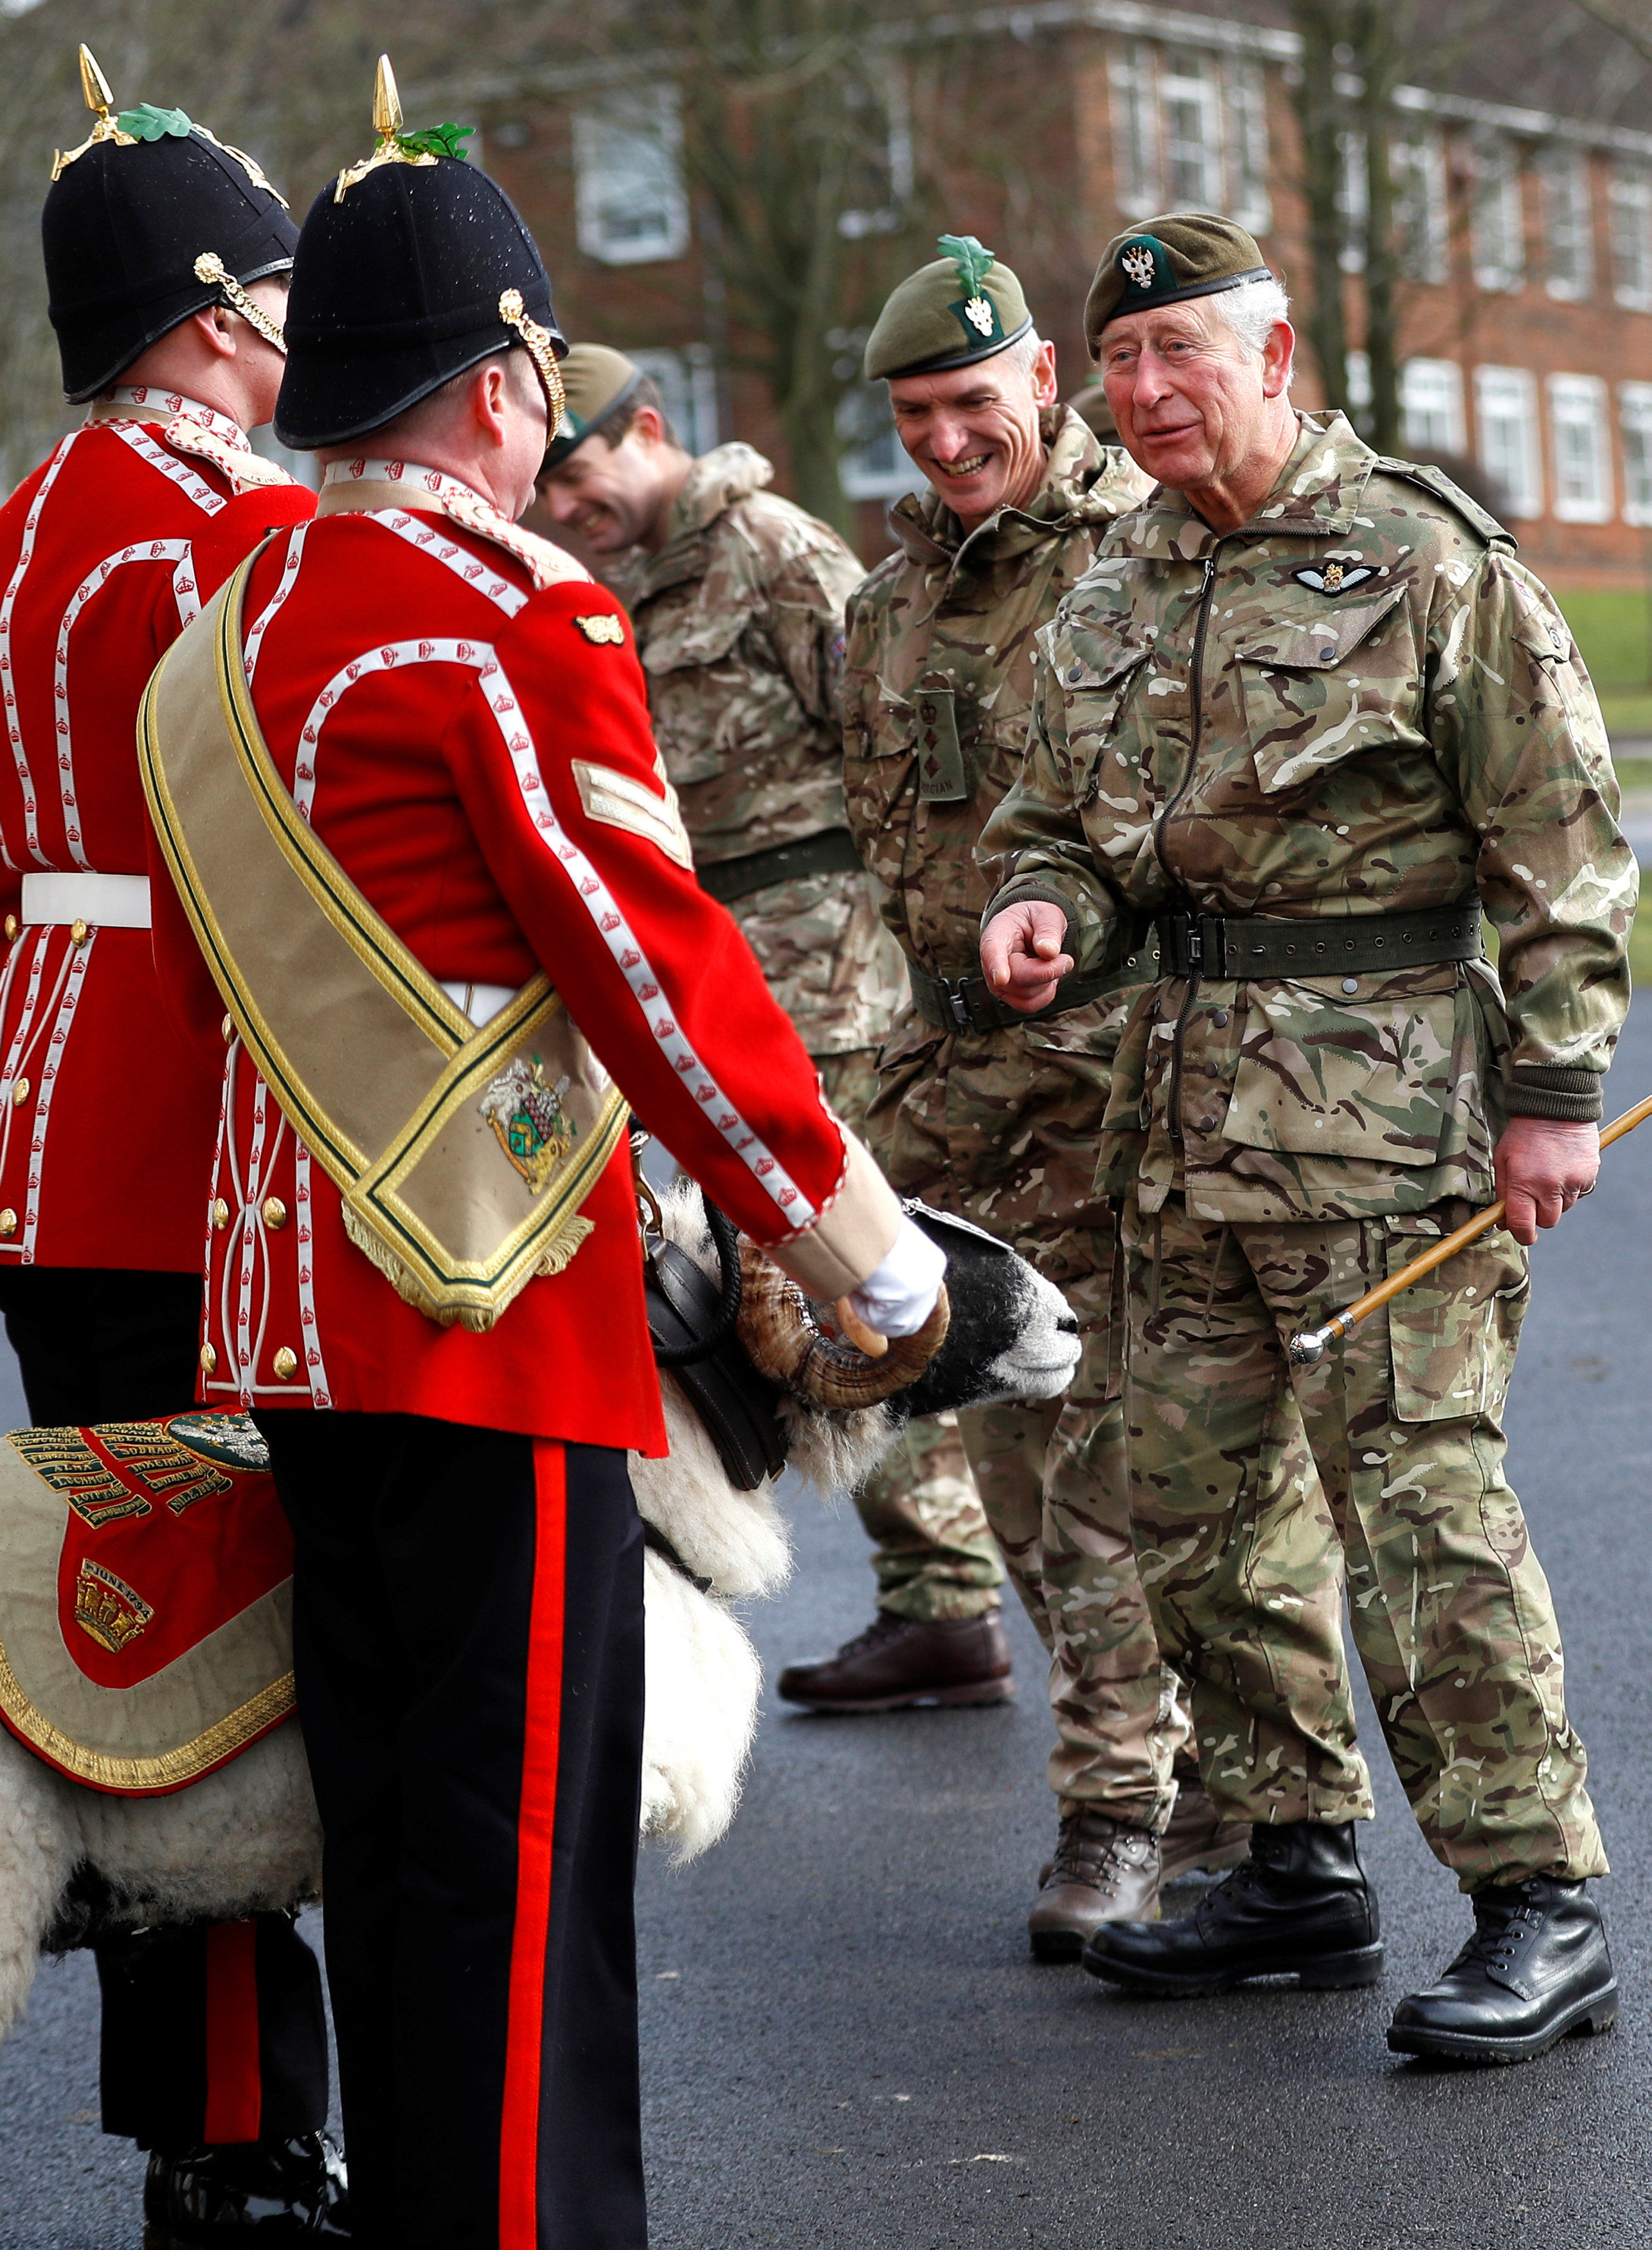 The Prince of Wales meets Private Derby XXII, a Swaledale Ram and the Regimental Mascot during his visit to the 1st Battalion the Mercian Regiment